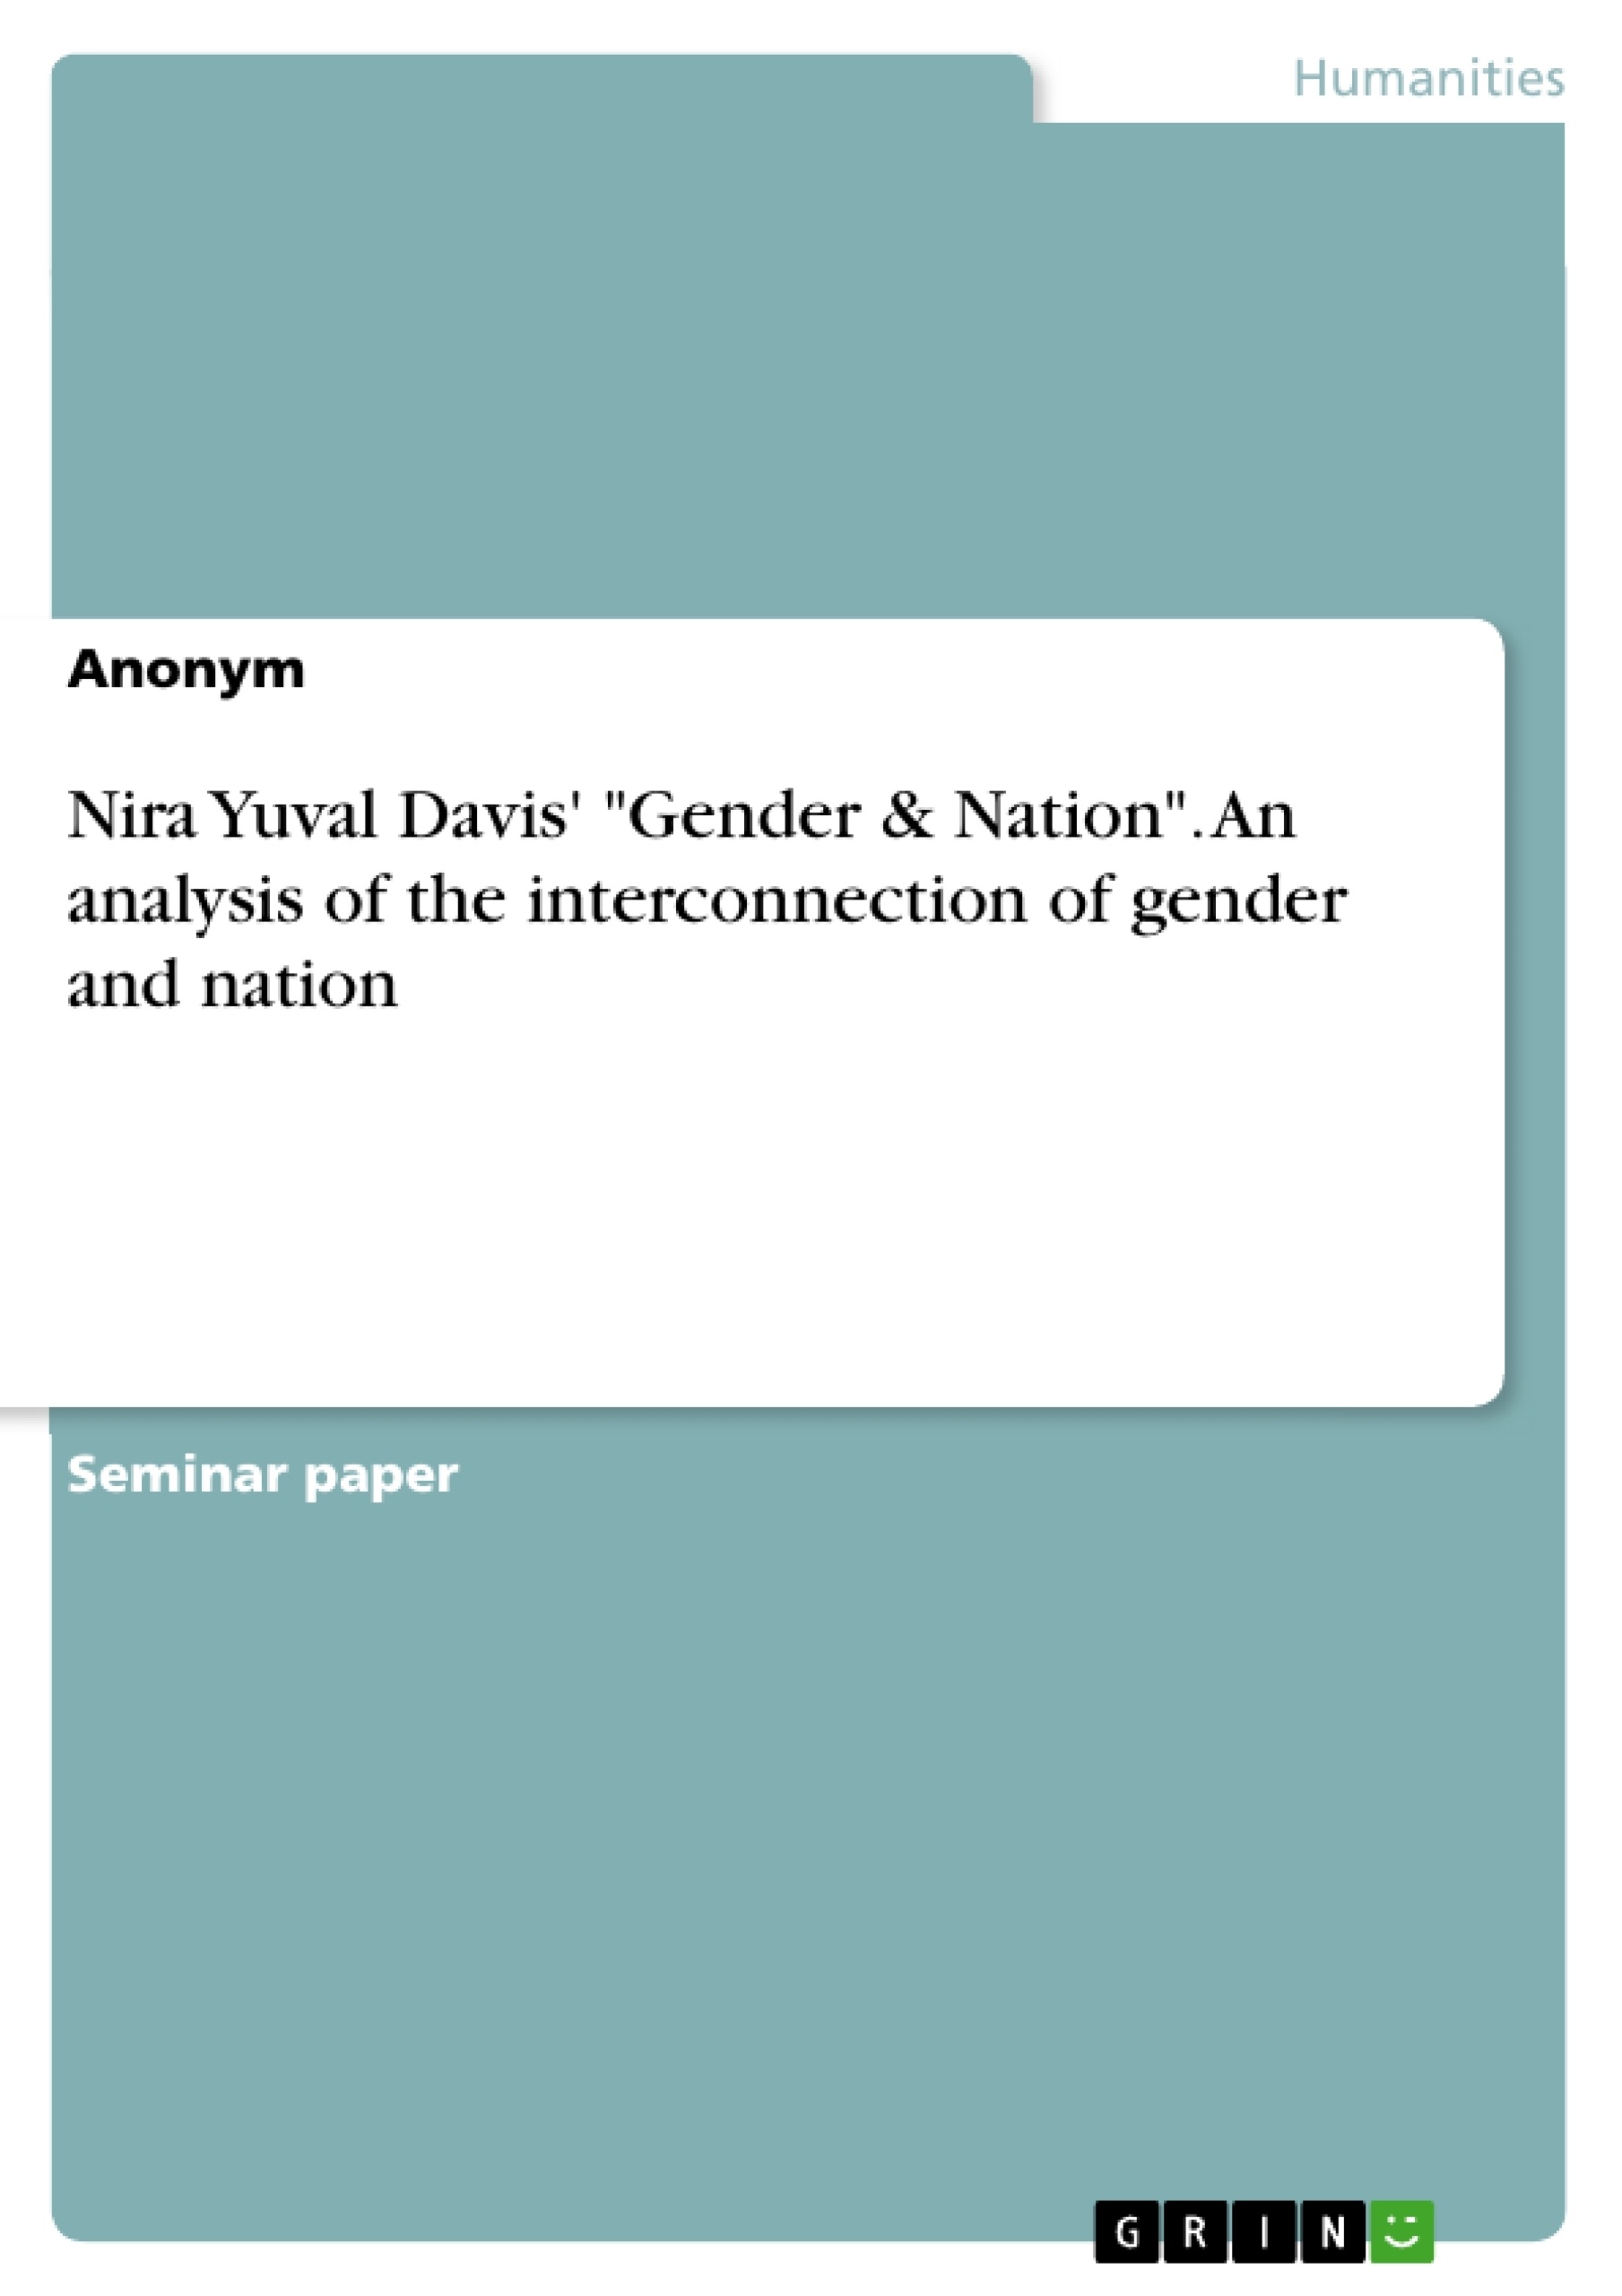 Title: Nira Yuval Davis' "Gender & Nation". An analysis of the interconnection of gender and nation